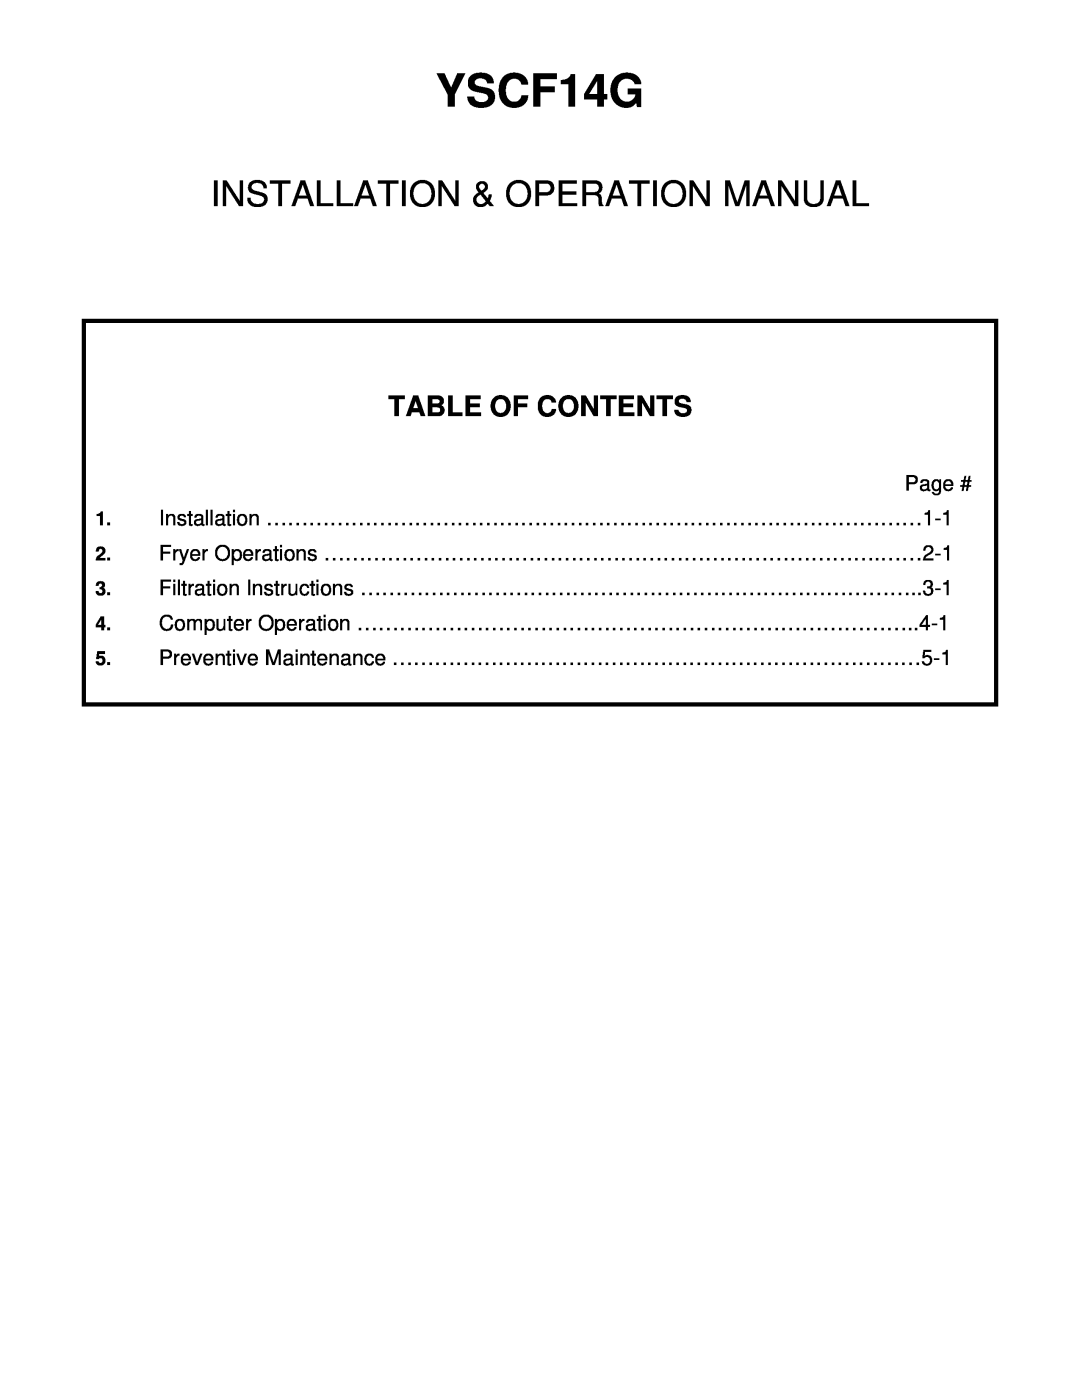 Frymaster YSCF14G operation manual Table Of Contents, Page # 1. Installation …………………………………………………………………………………1-1 